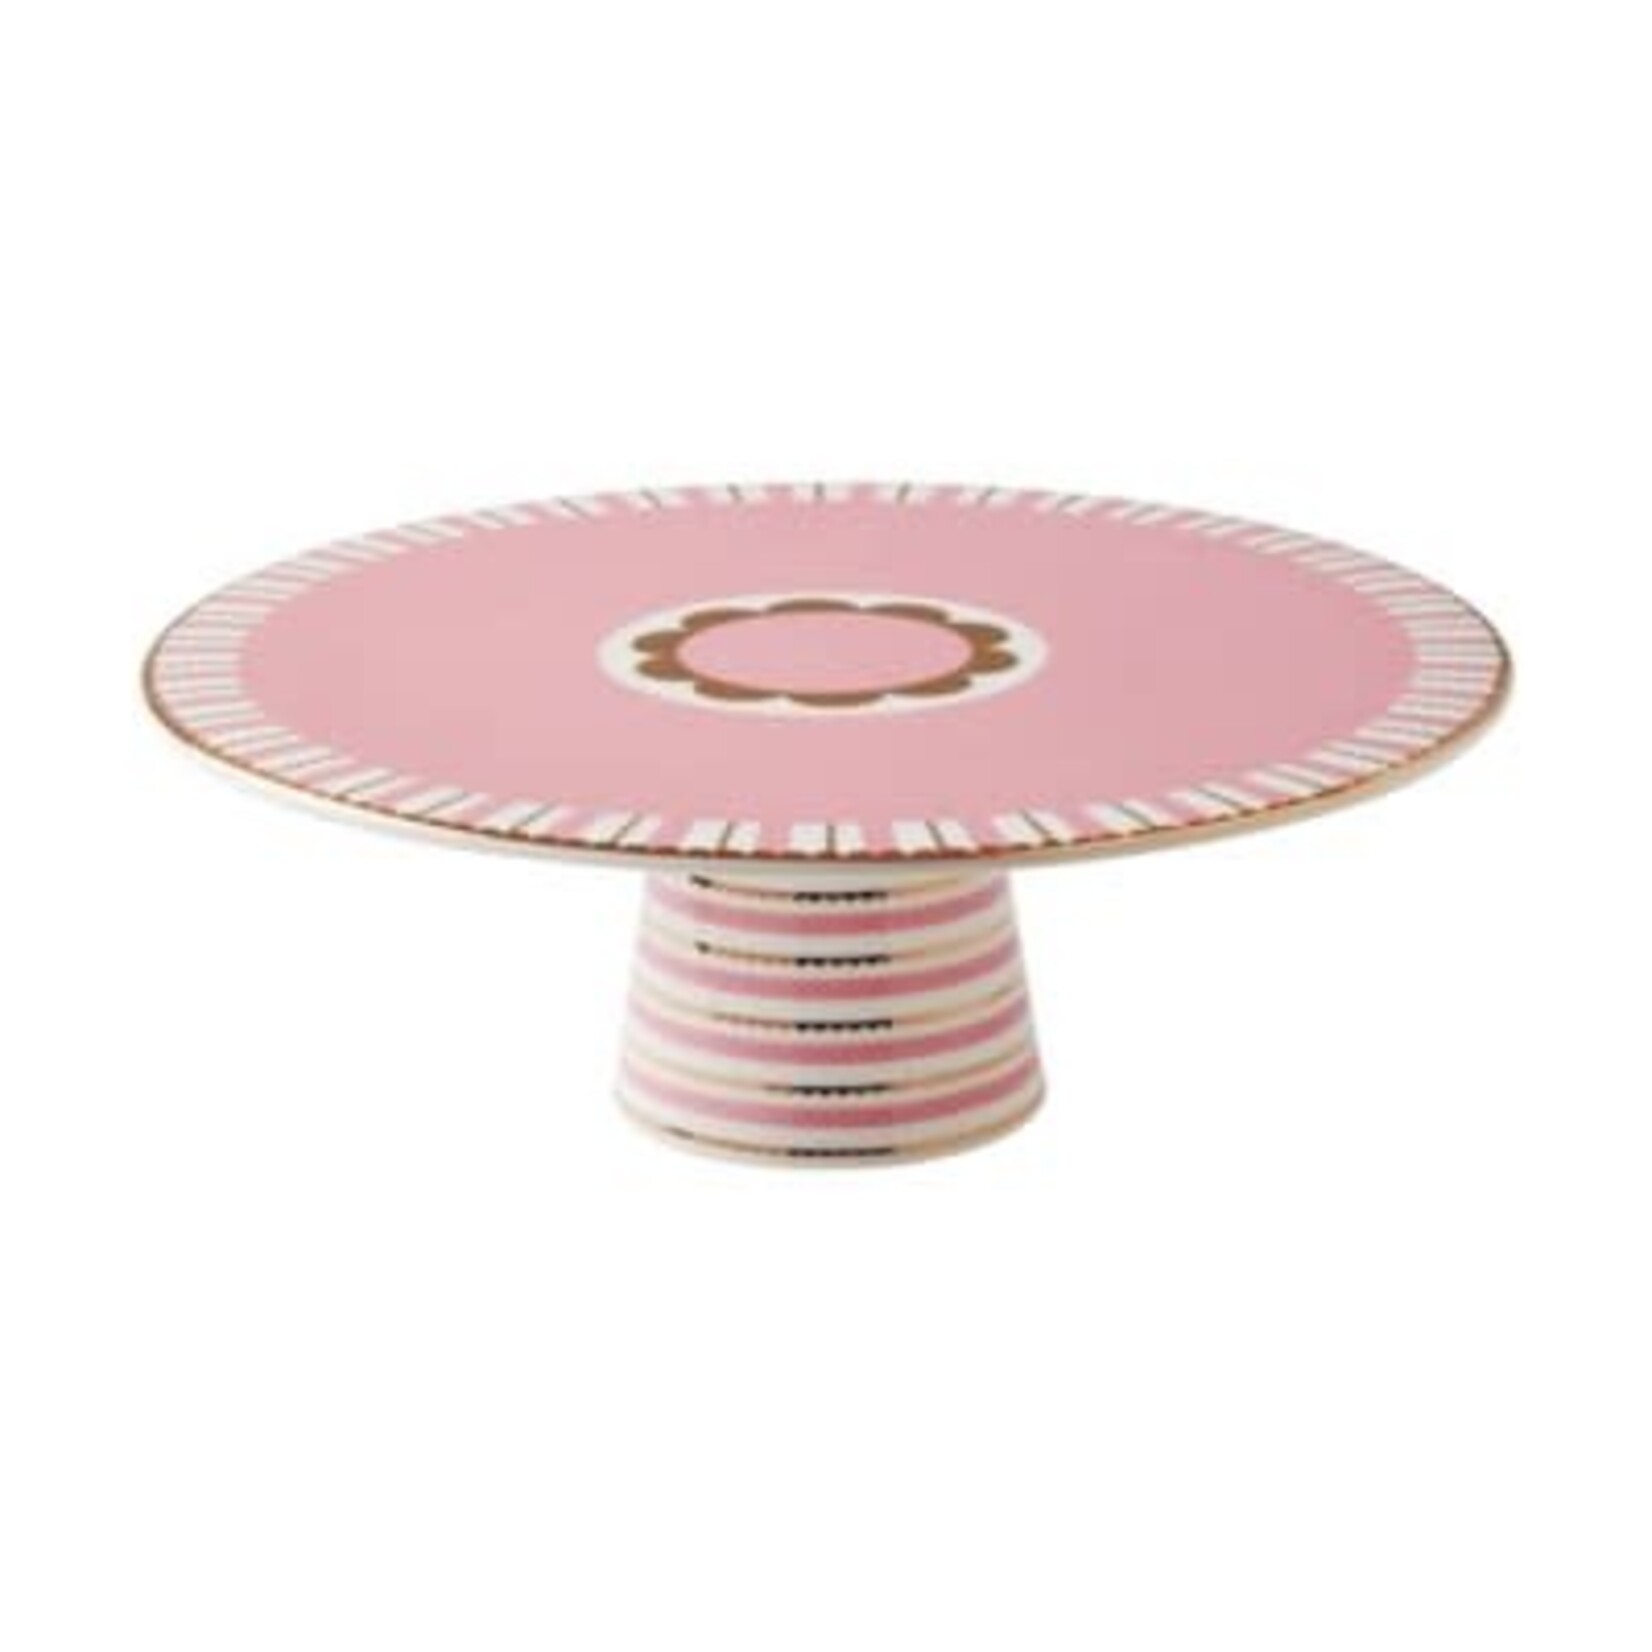 MAXWELL WILLIAMS MAXWELL WILLIAMS Regency Pink Footed Cake Stand